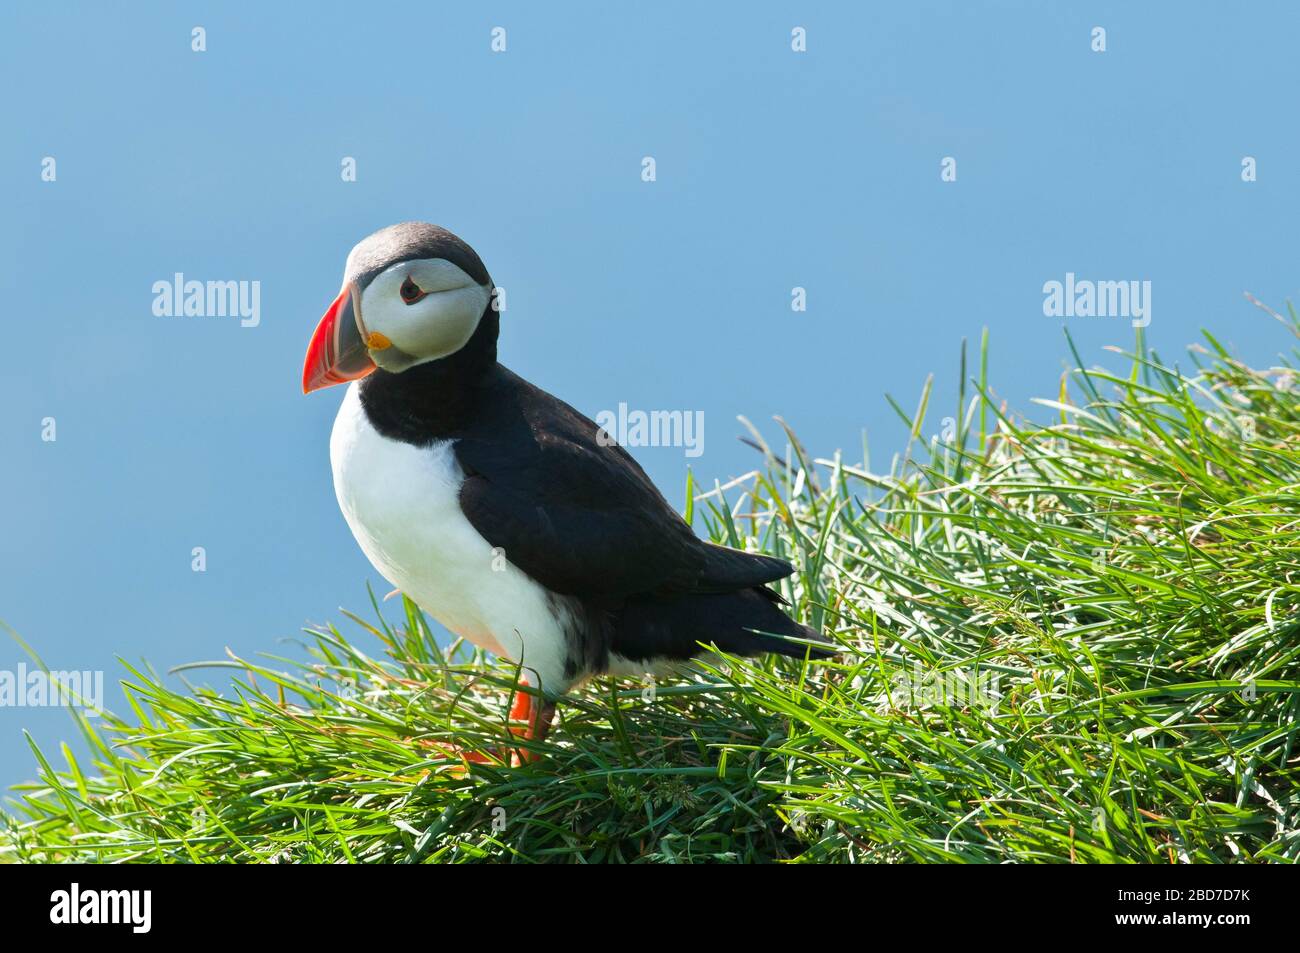 Puffin (Fratercula arctica), standing in the grass on cliff, Iceland Stock Photo